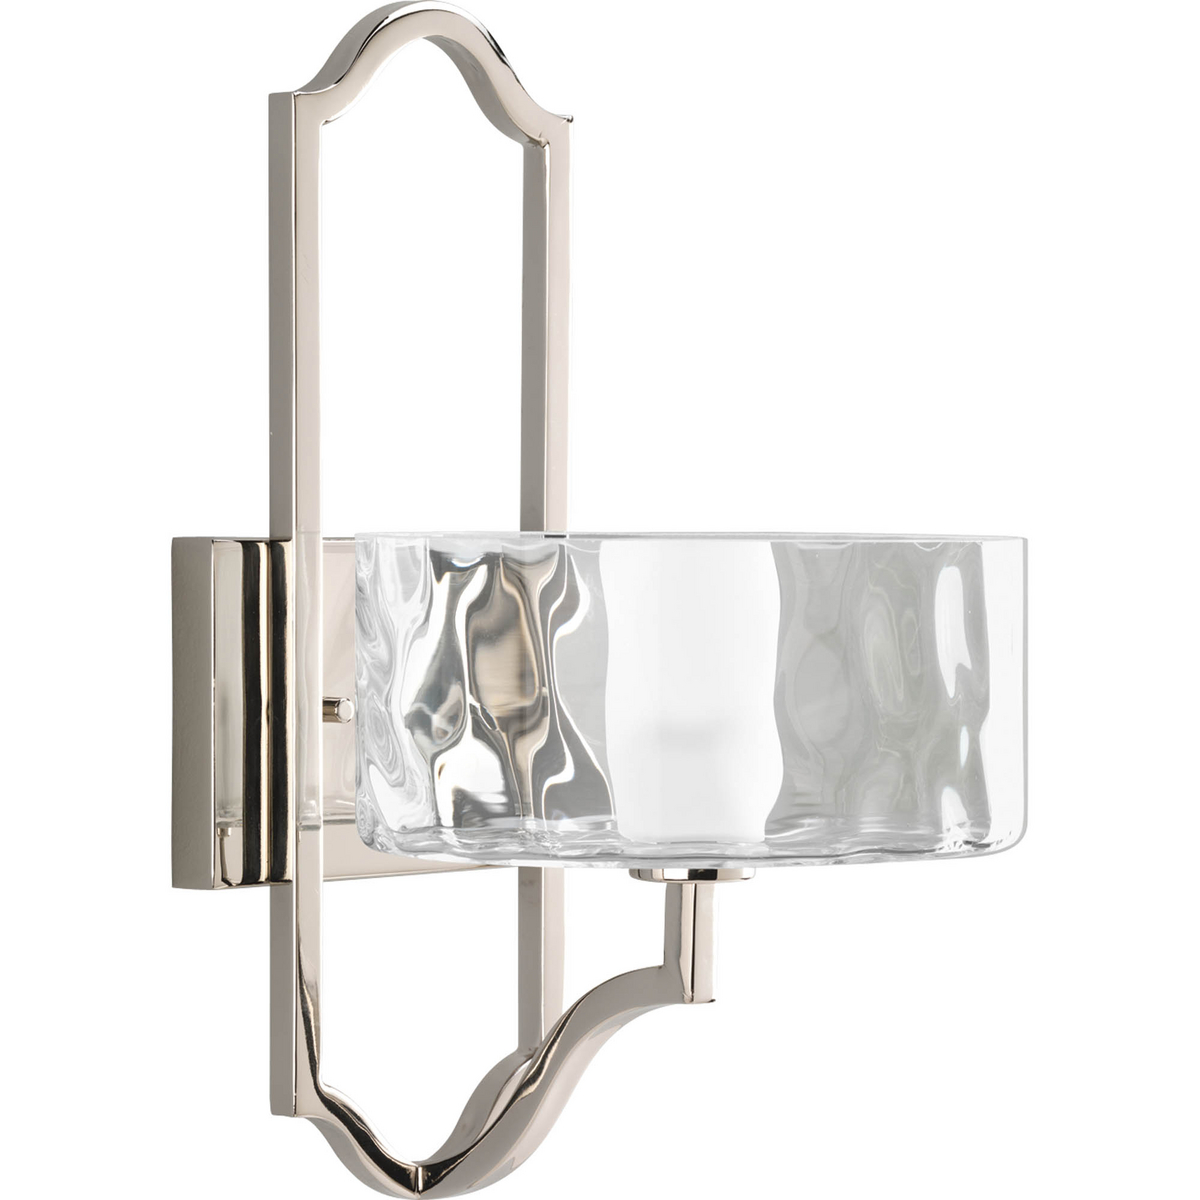 One-light wall sconce. Caress features a chic, sophisticated one-light wall sconce featuring a Polished Nickel metal frame with layered glass diffusers to cast a glimmering light. An outer shade of clear, water glass adds rich texture and playful ref...